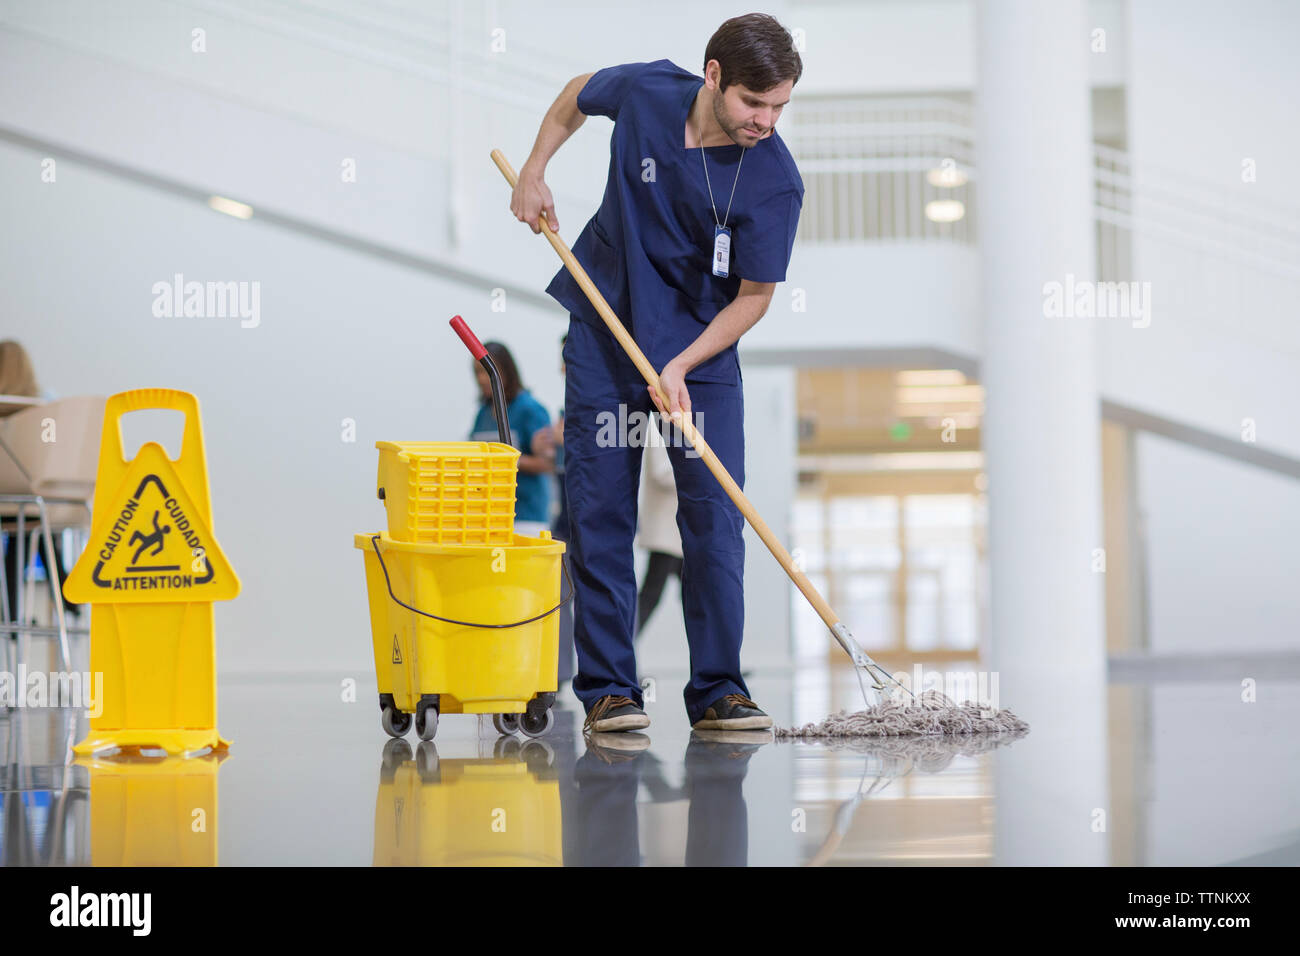 Male worker cleaning hospital floor Stock Photo